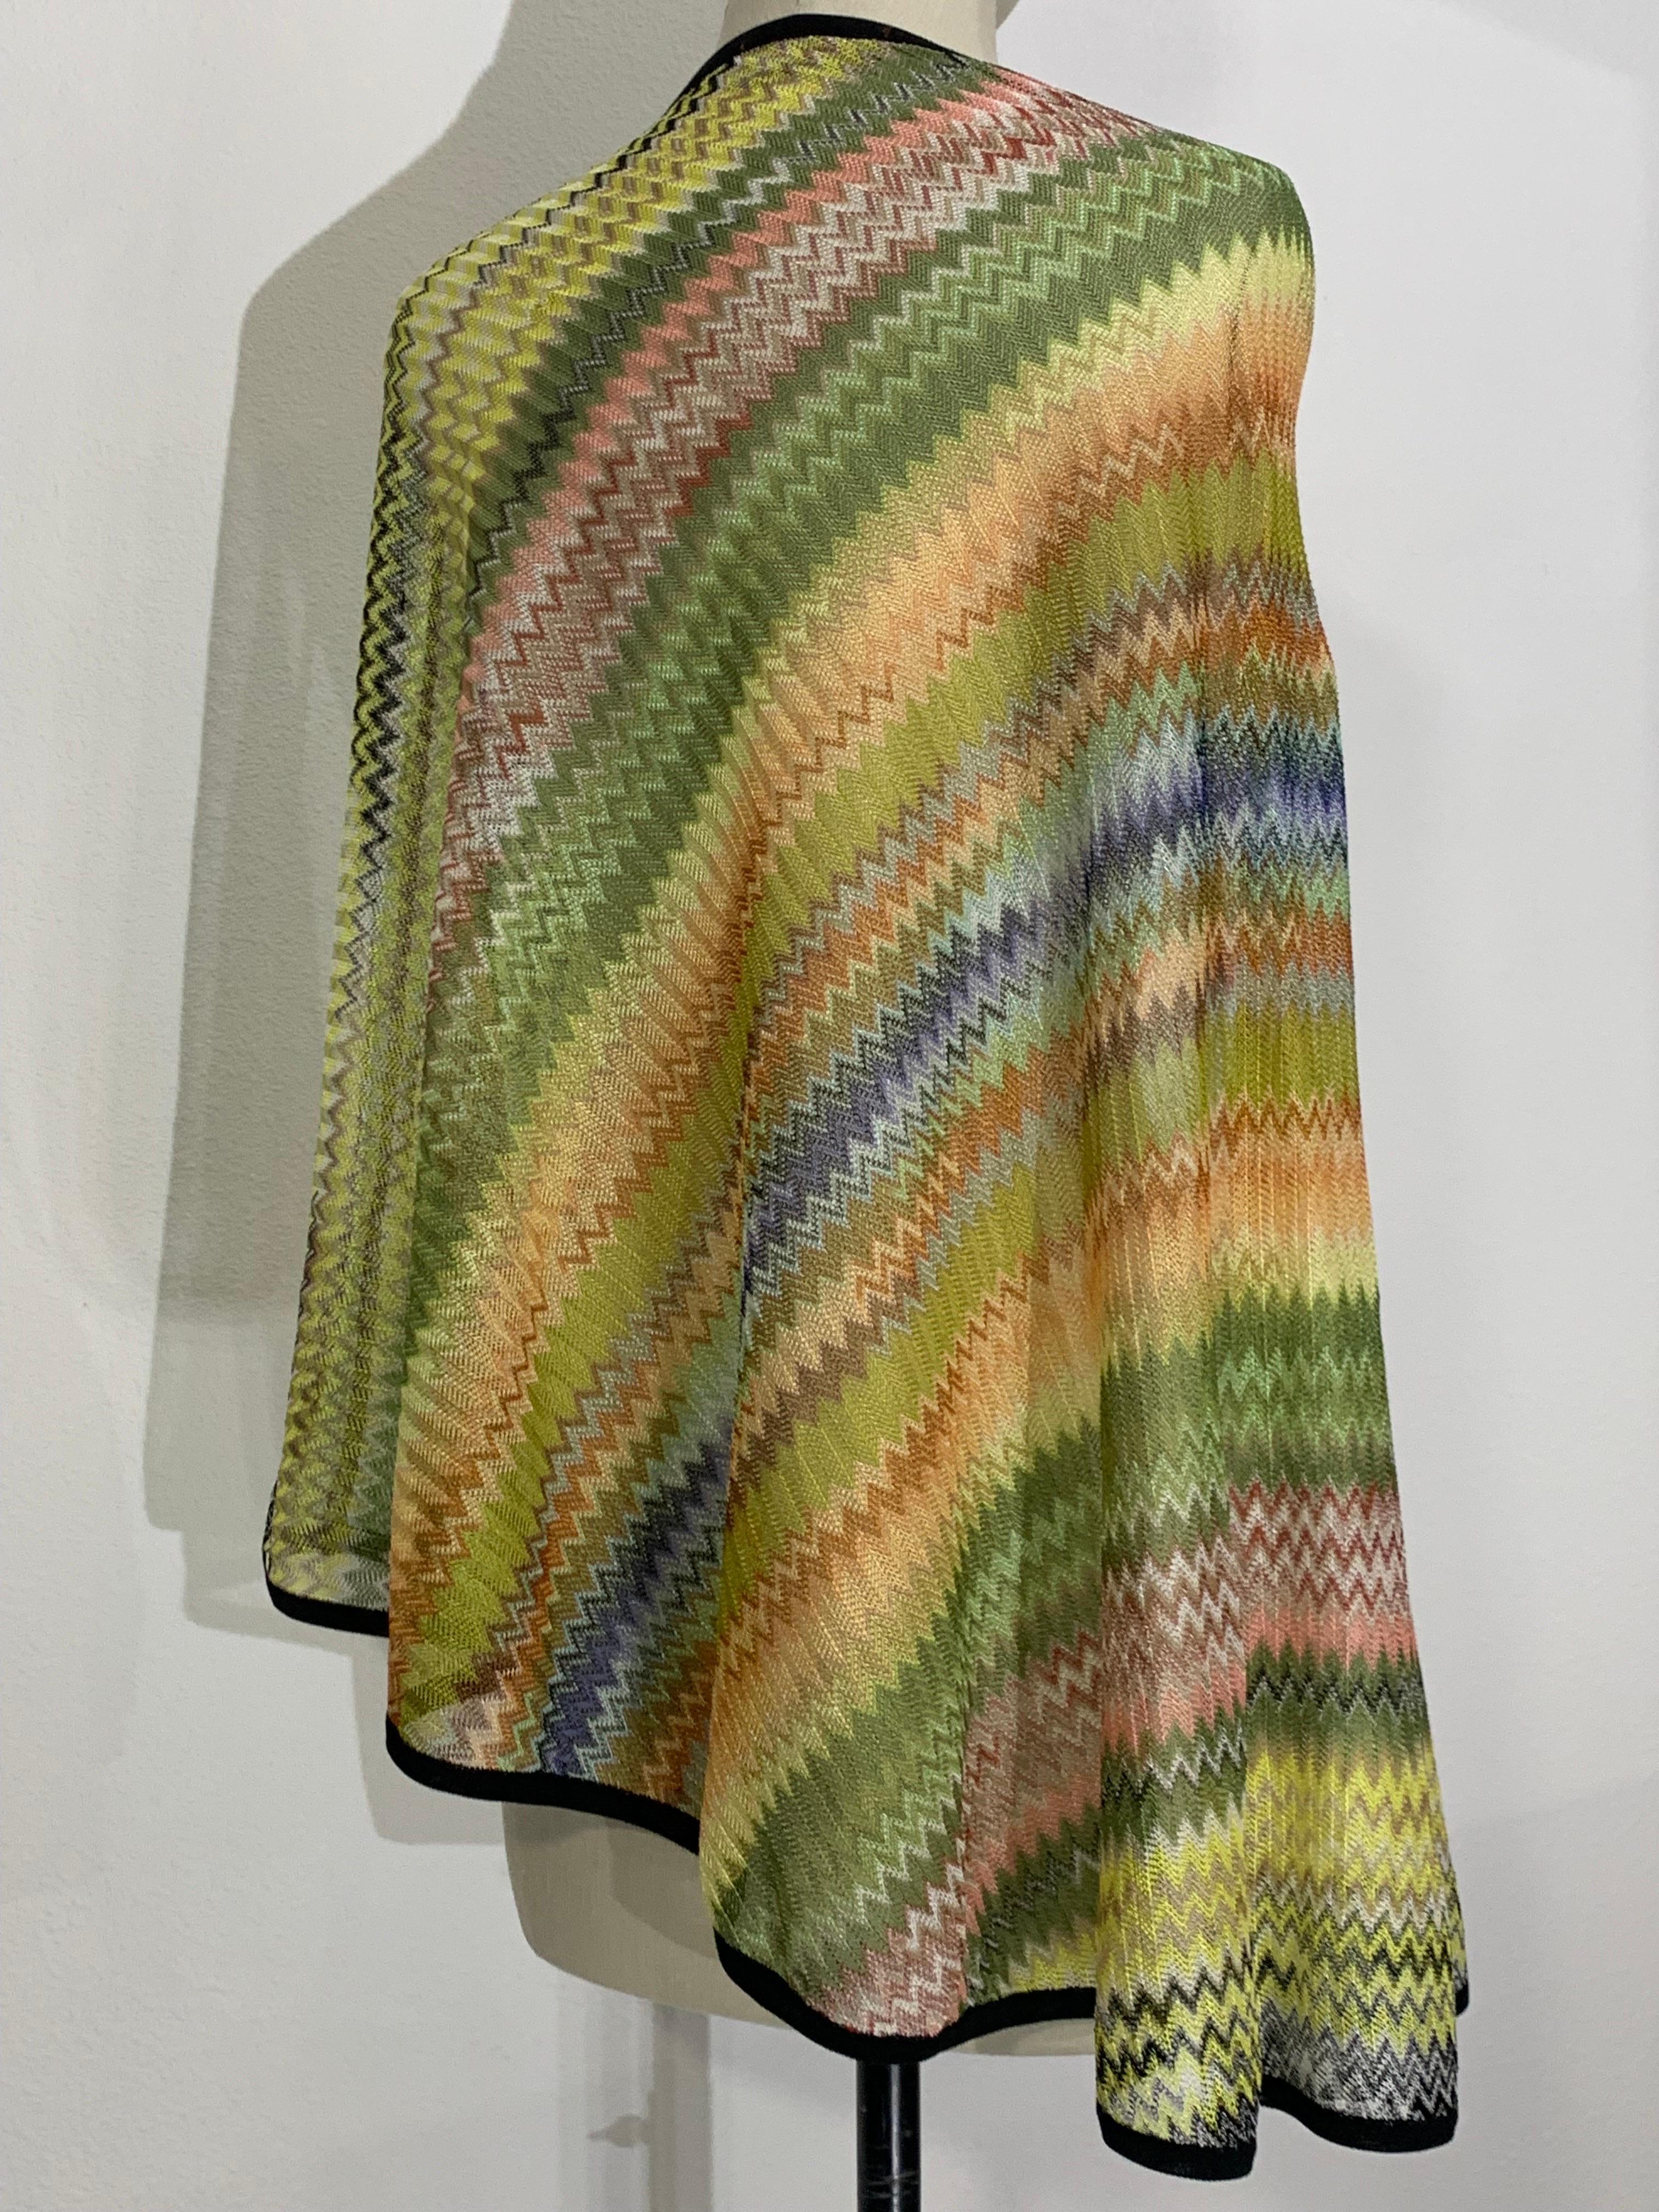 Missoni Spring/Summer Rayon & Cotton Knit Cover-Up in Classic Missoni Zig-Zag For Sale 7